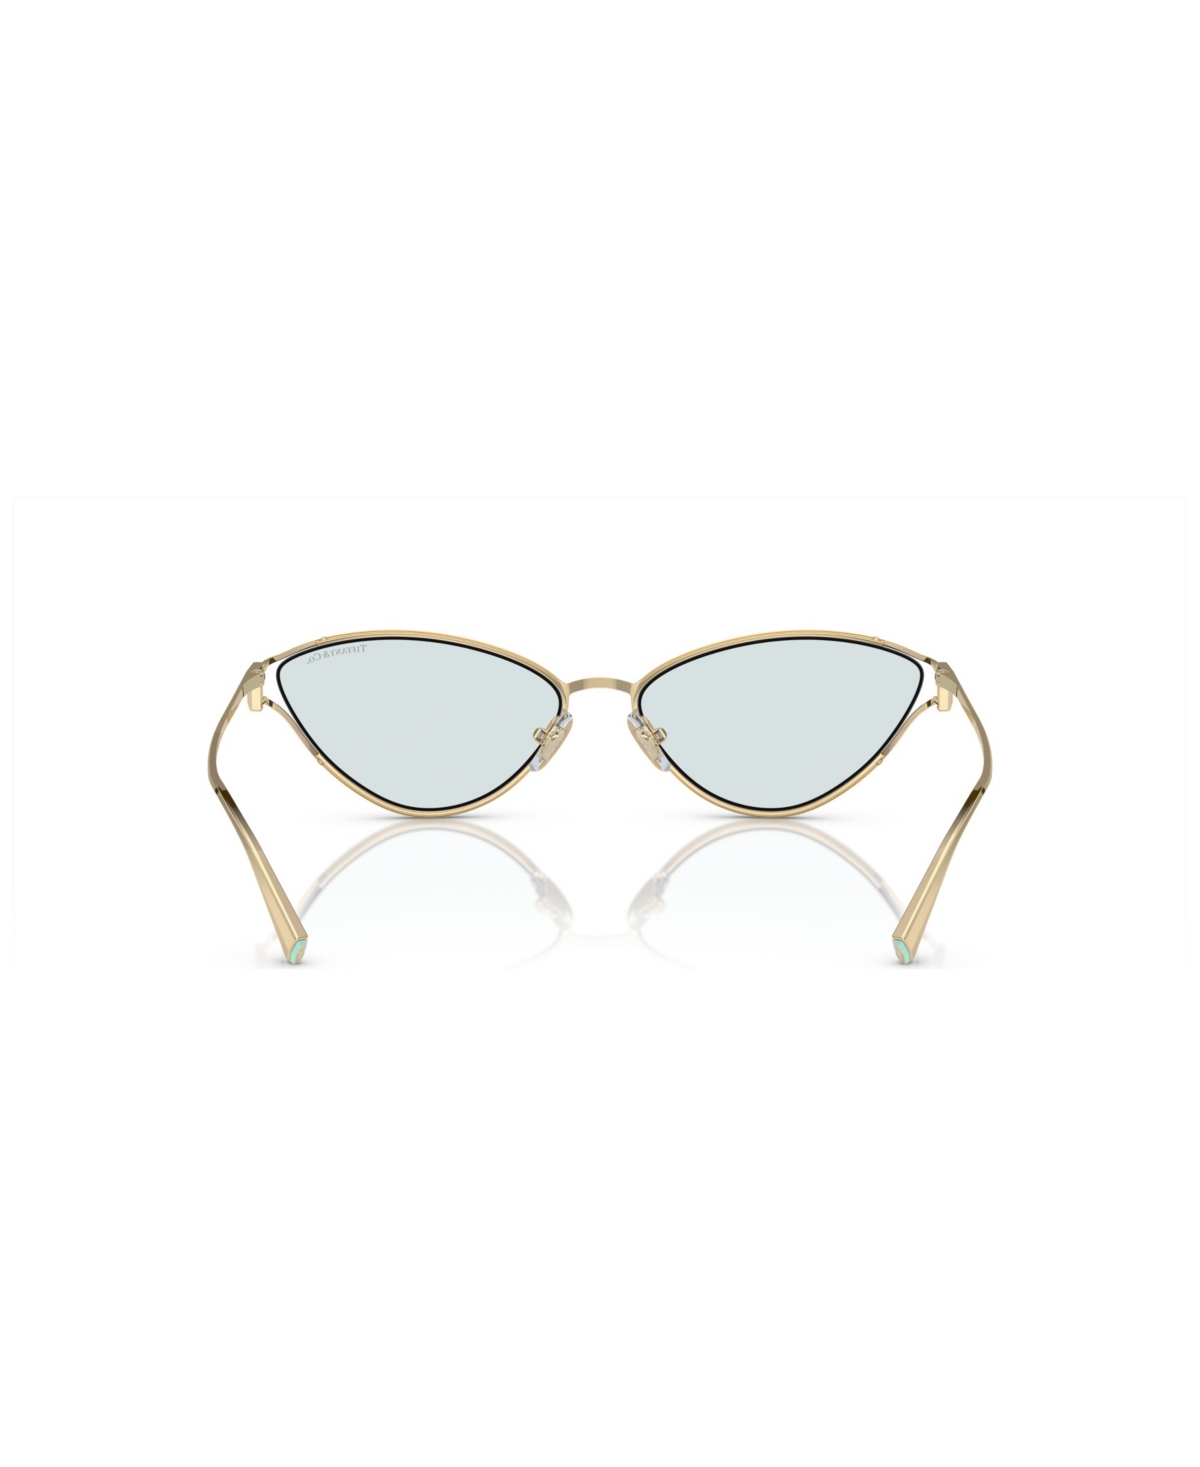 Shop Tiffany & Co Women's Sunglasses, Photocromic Tf3095 In Pale Gold